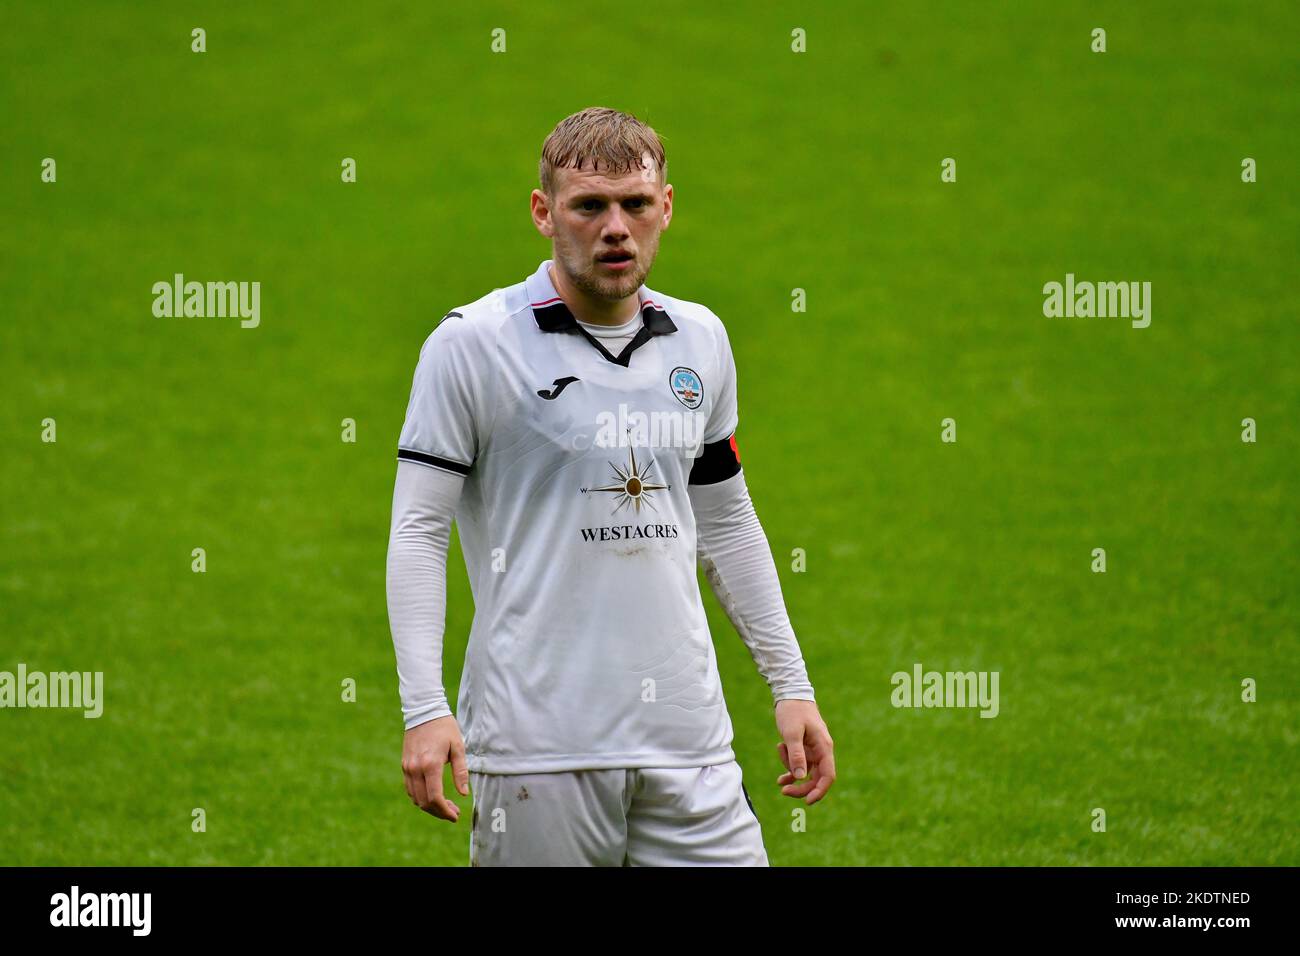 Swansea, Wales. 8 November 2022. Josh Thomas of Swansea City during the Professional Development League game between Swansea City Under 21 and Queens Park Rangers Under 21 at the Swansea.com Stadium in Swansea, Wales, UK on 8 November 2022. Credit: Duncan Thomas/Majestic Media/Alamy Live News. Stock Photo